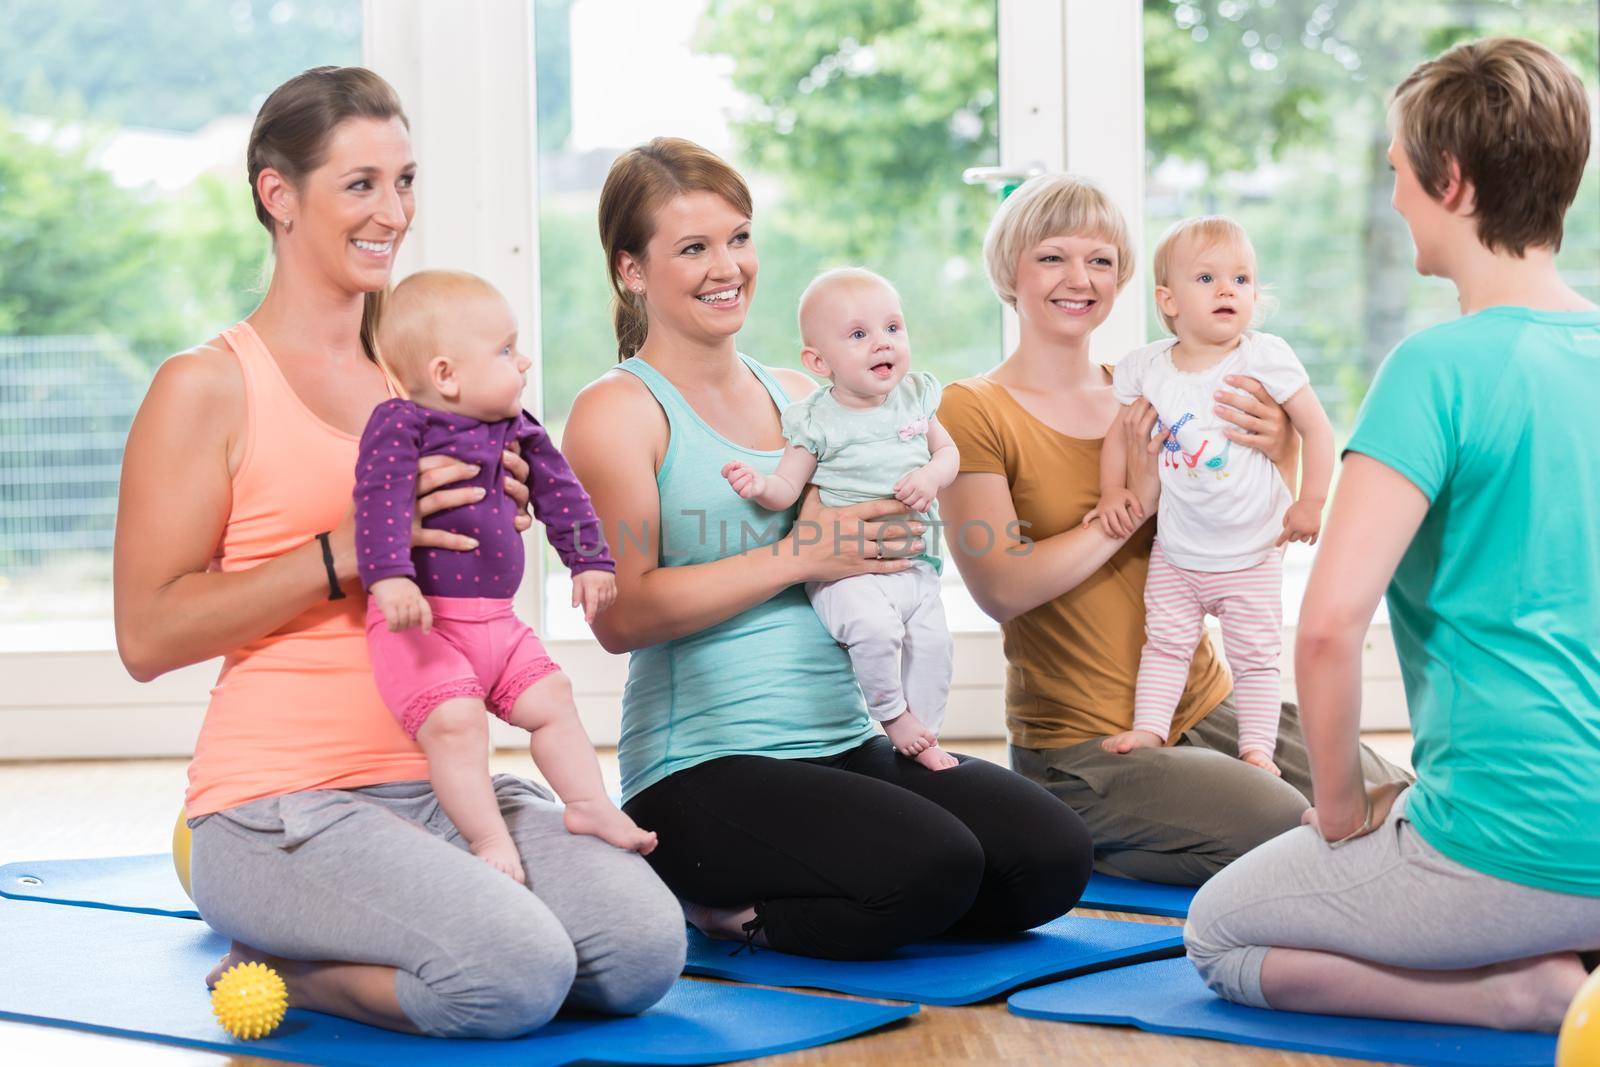 Women and their babies in mother-child gymnastic course by Kzenon